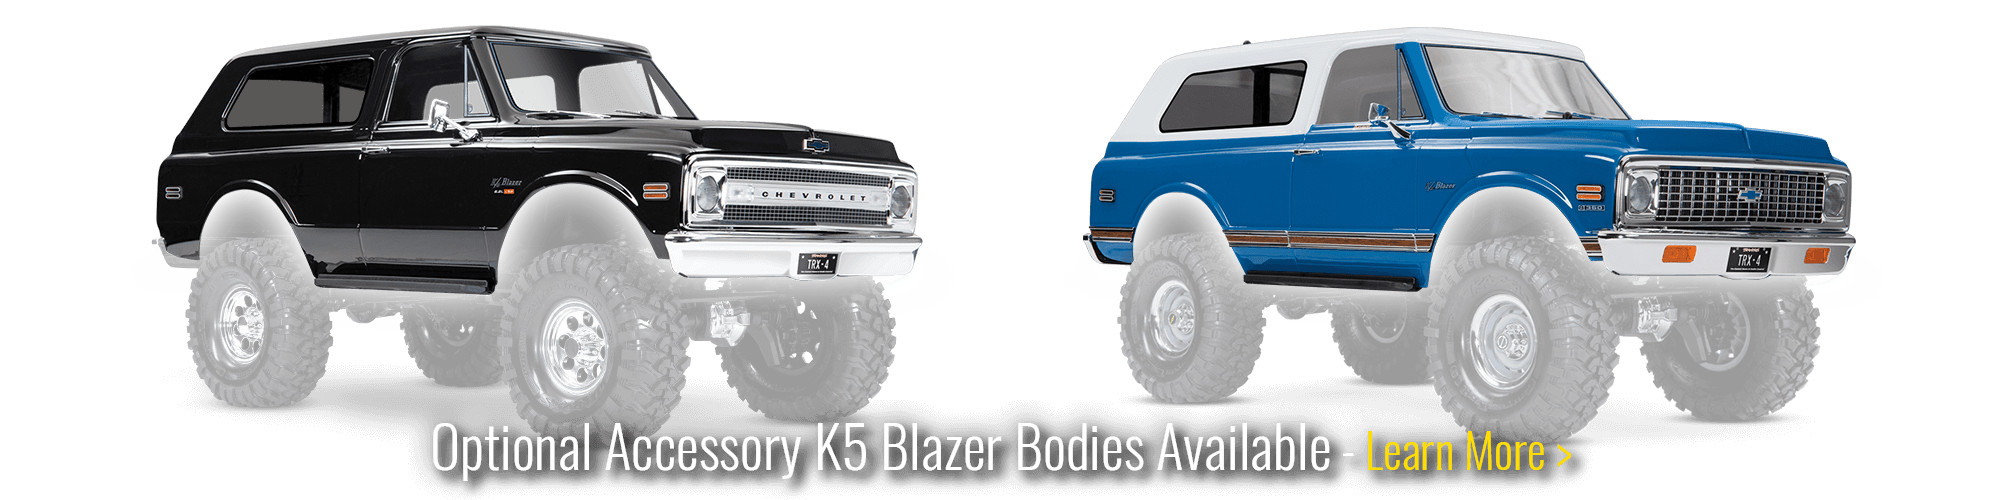 Optional Accessory K% Blazer Bodies Available - Learn More